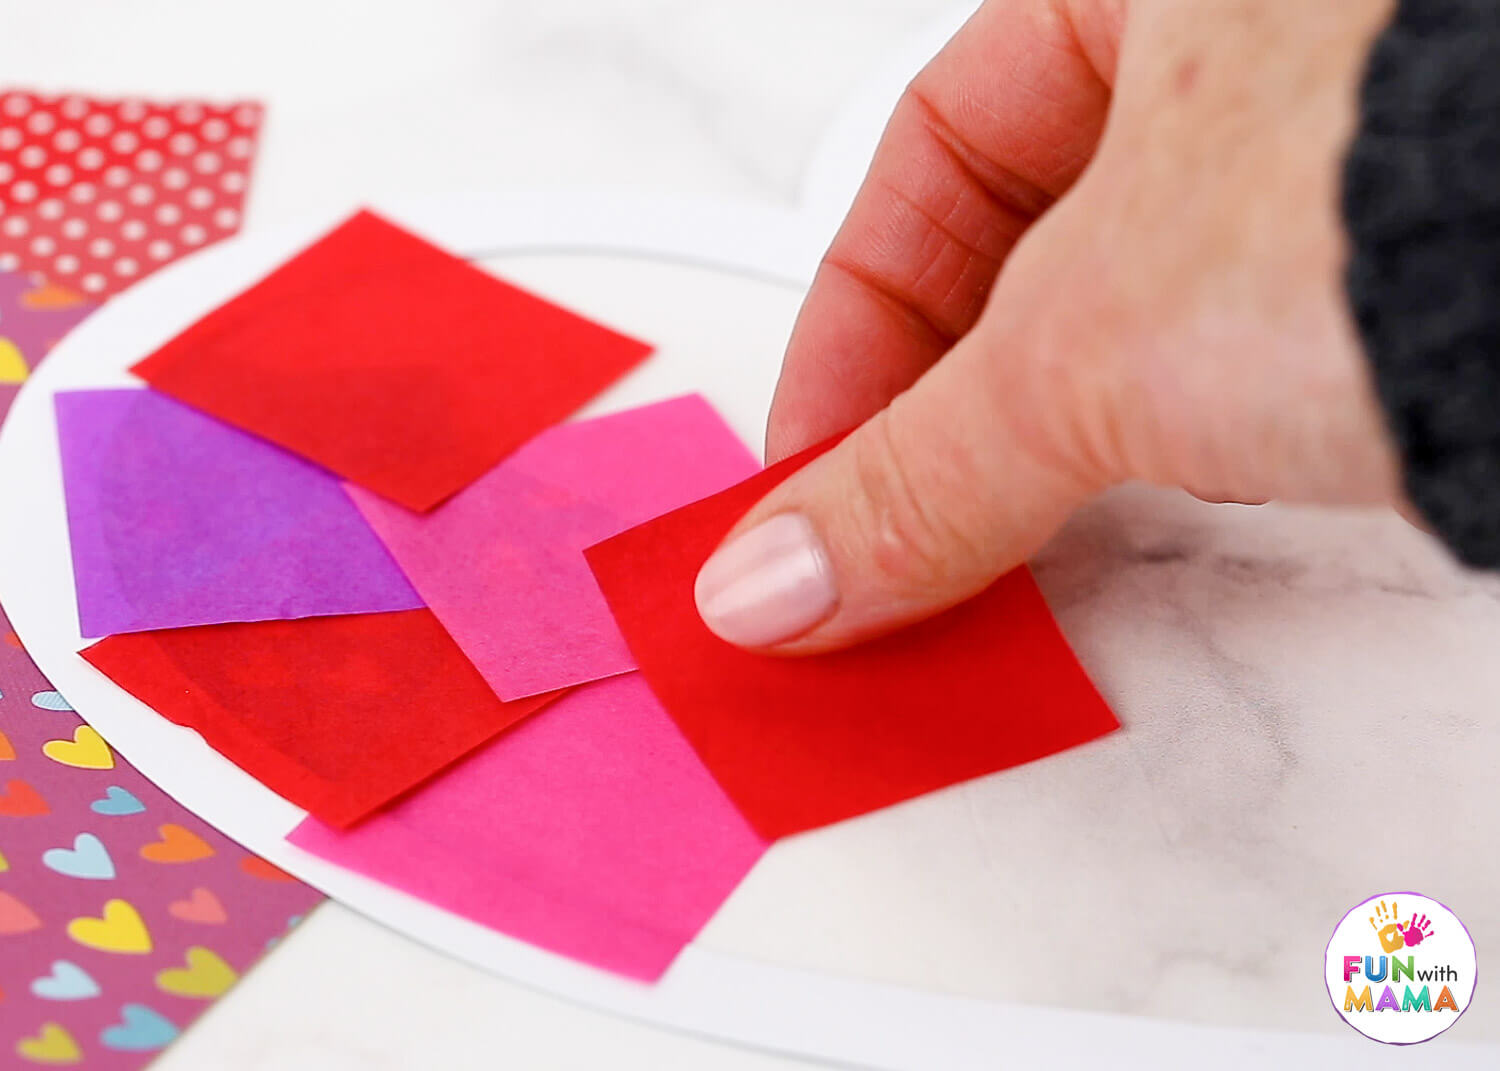 Red, pink and purple tissue paper squares placed in an alternating pattern inside the heart frame